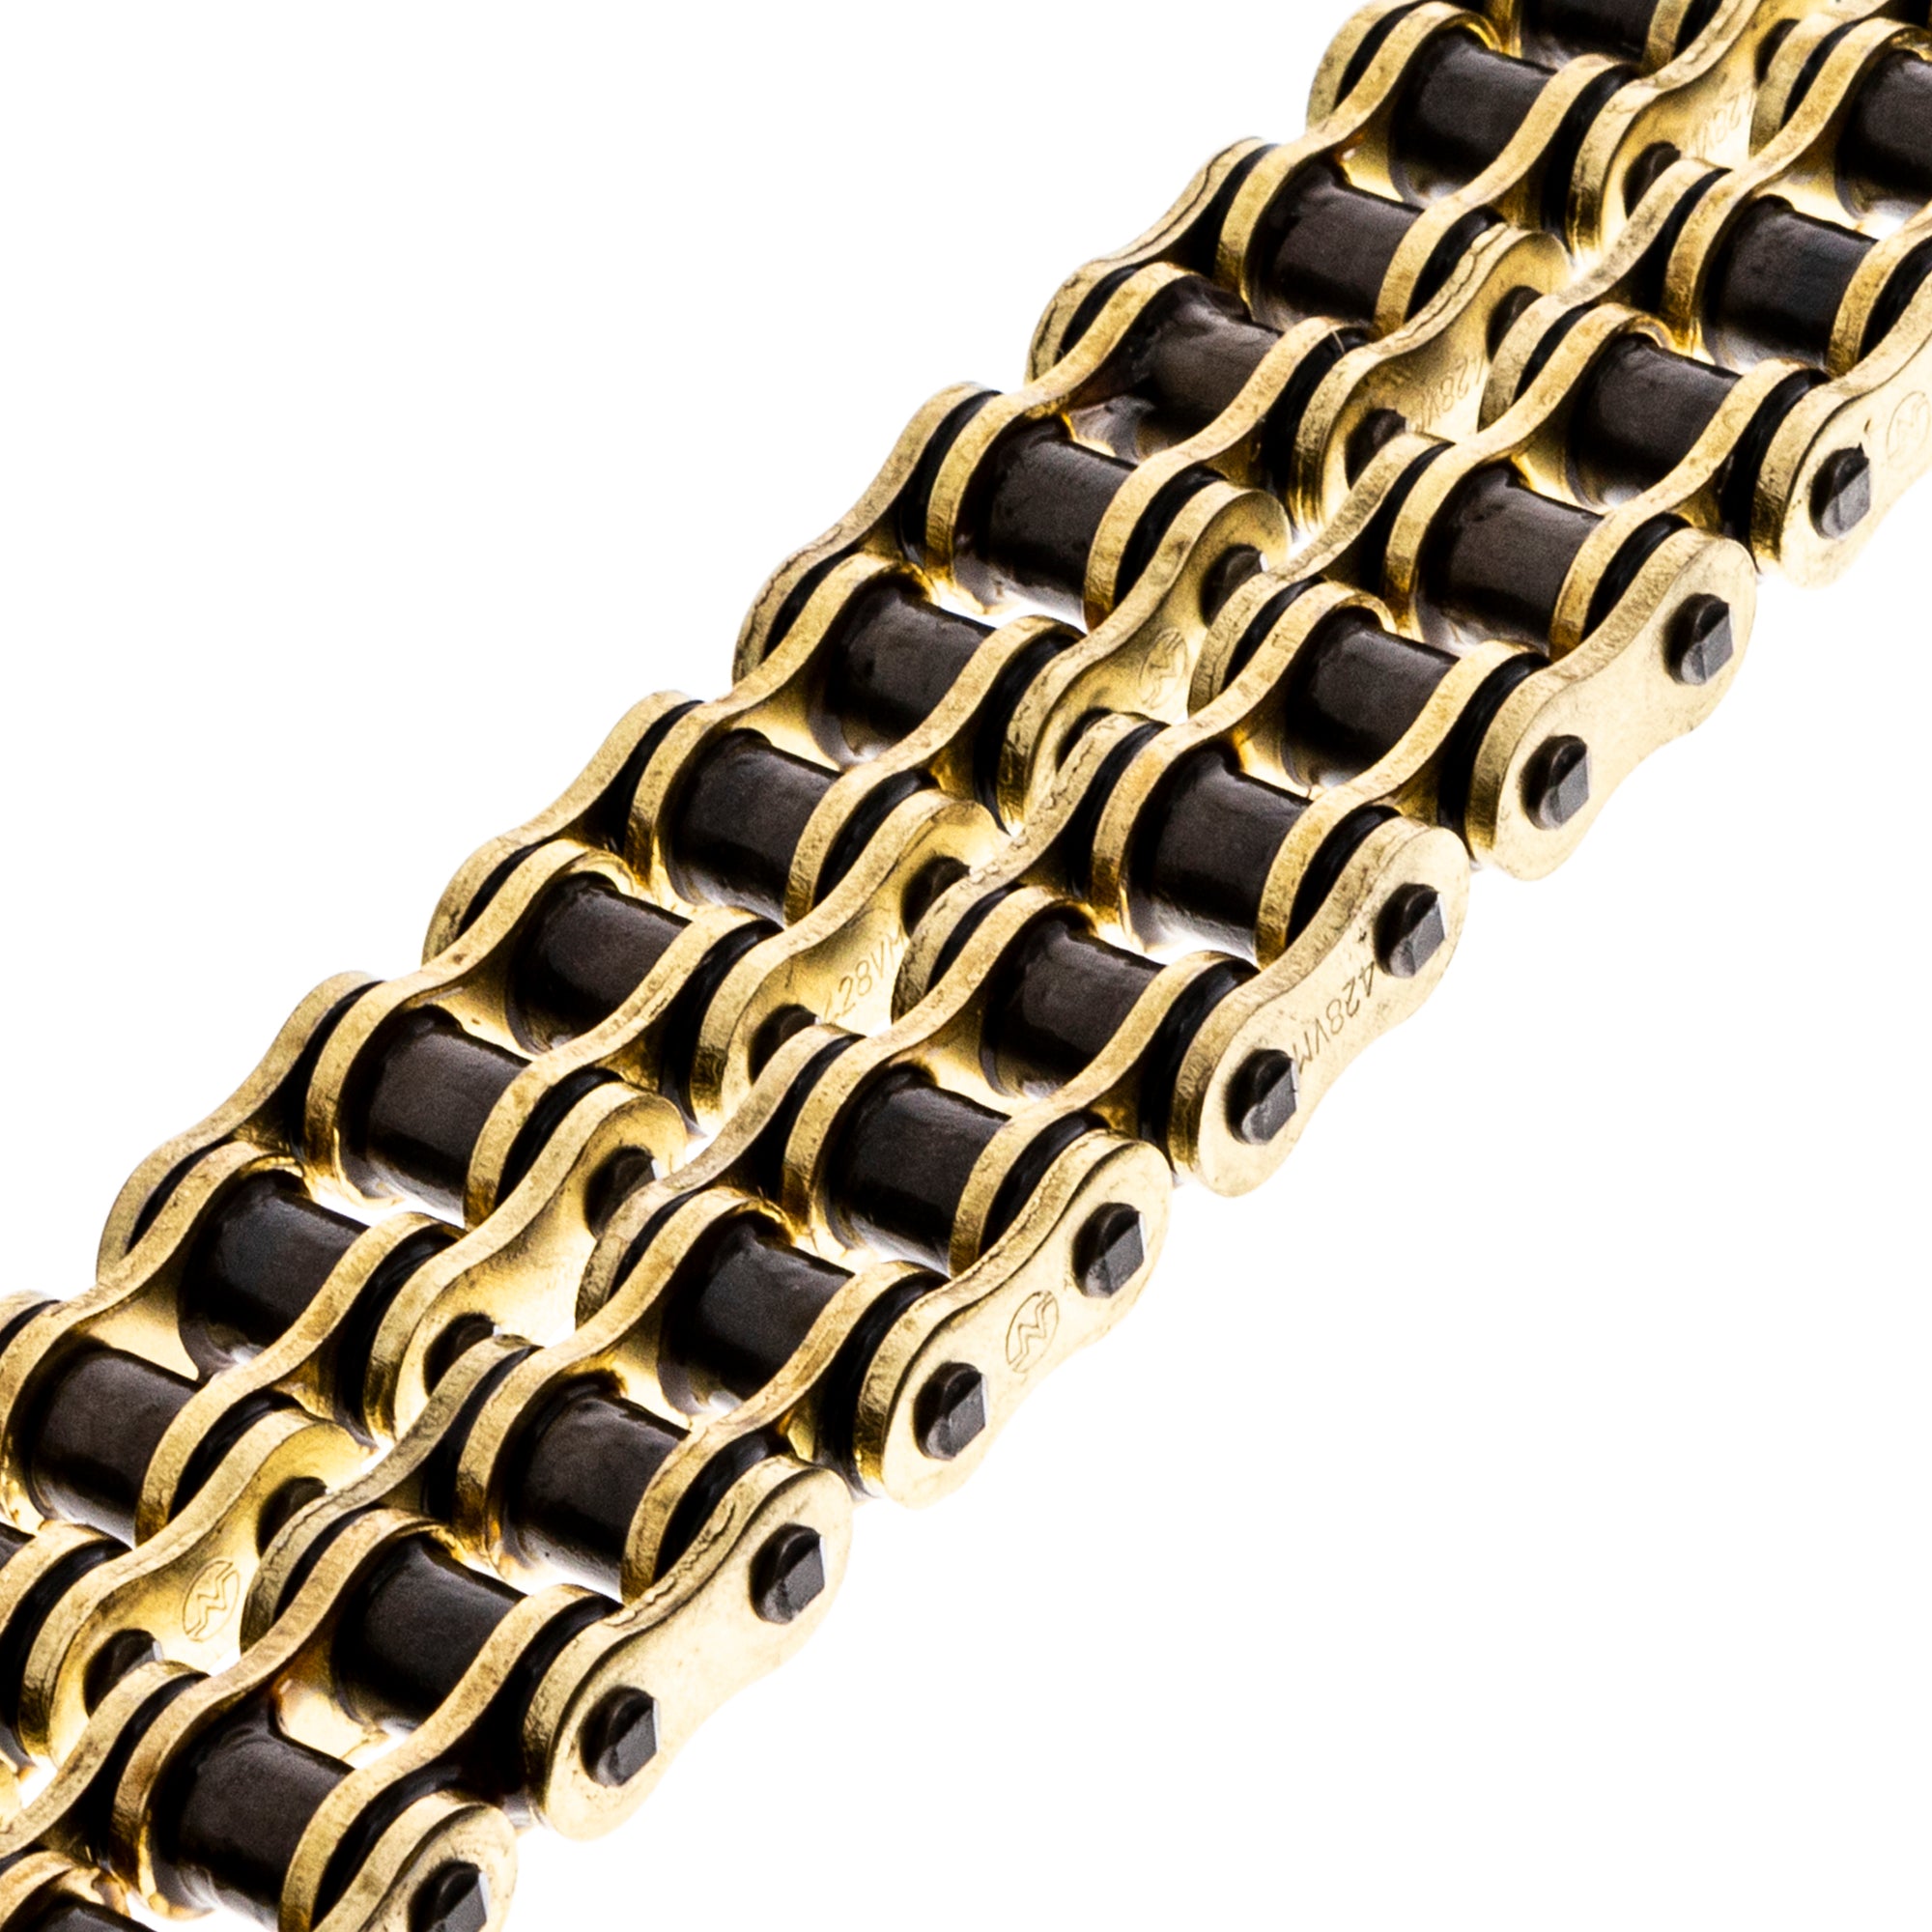 Gold X-Ring Chain 110 w/ Master Link for zOTHER YZ80 RV90 RS100 RM80 94504-28110-00 5419 NICHE 519-CDC2520H